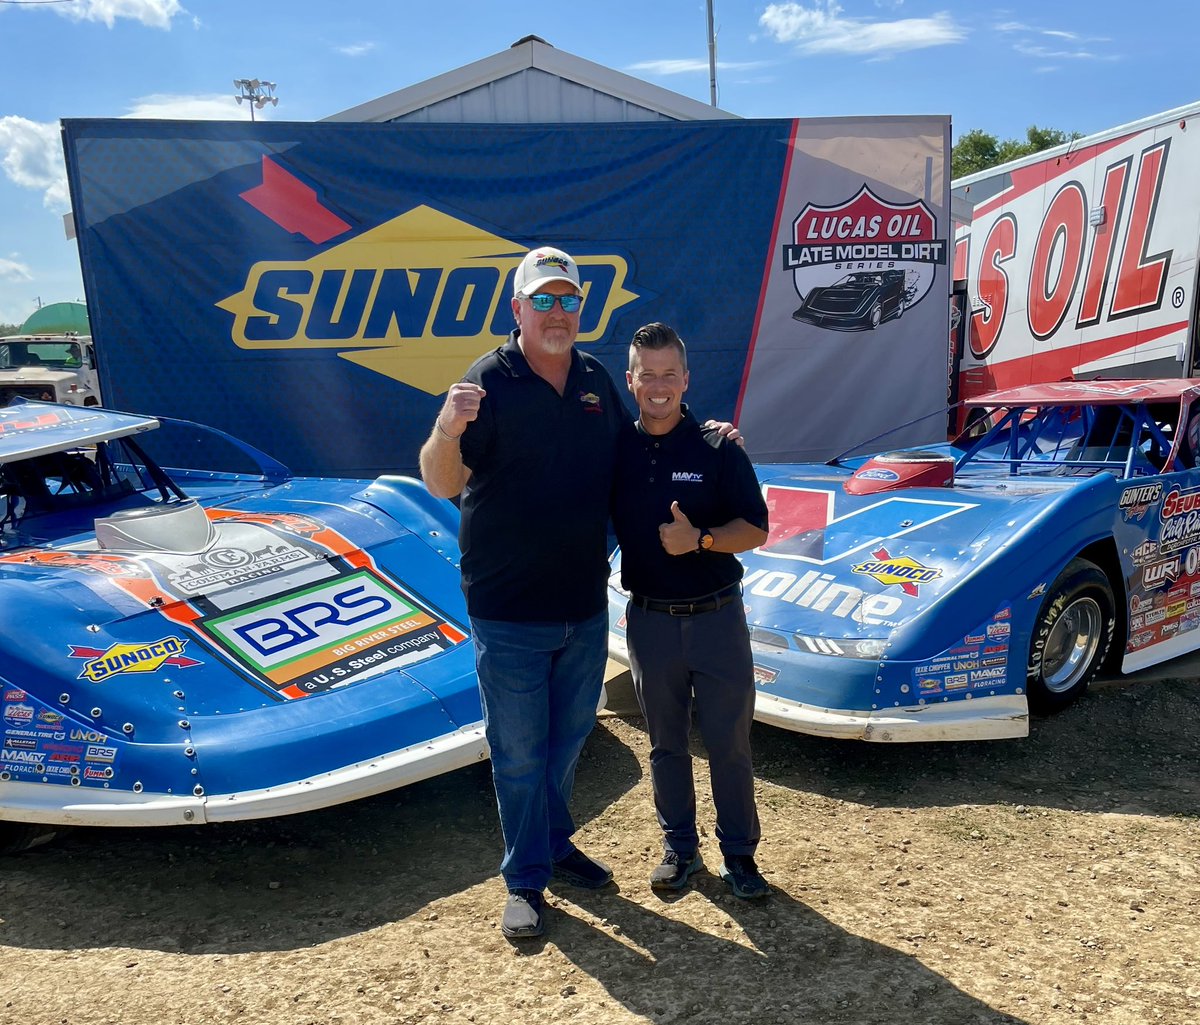 A huge shoutout to @RitchieLewisSr1 and @GoSunoco for their support of racing. Just filmed an Inside Track with them for tonight’s @MAVTV on @FloRacing broadcast of @lucasdirt. Watch live at 6:45pm ET. #FlorenceYall #NorthSouth100